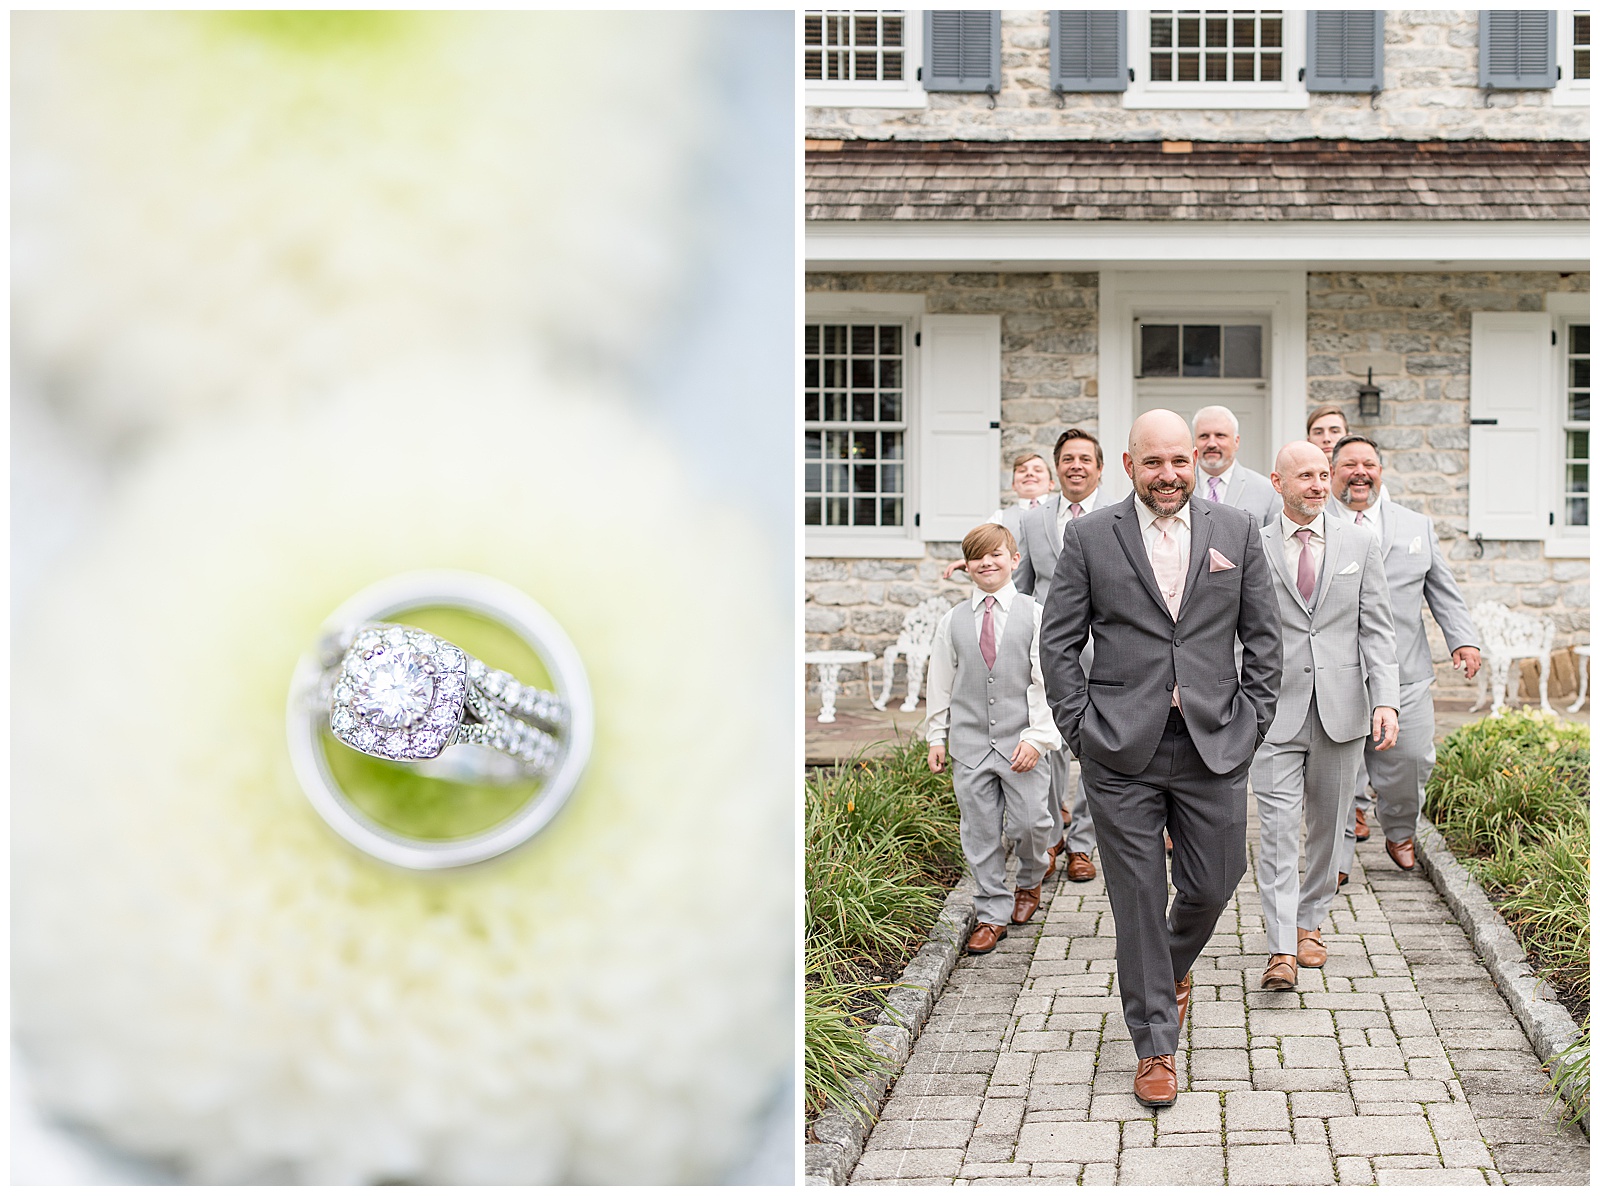 groom walking towards camera with hands in pockets smiling as his groomsmen follow behind him